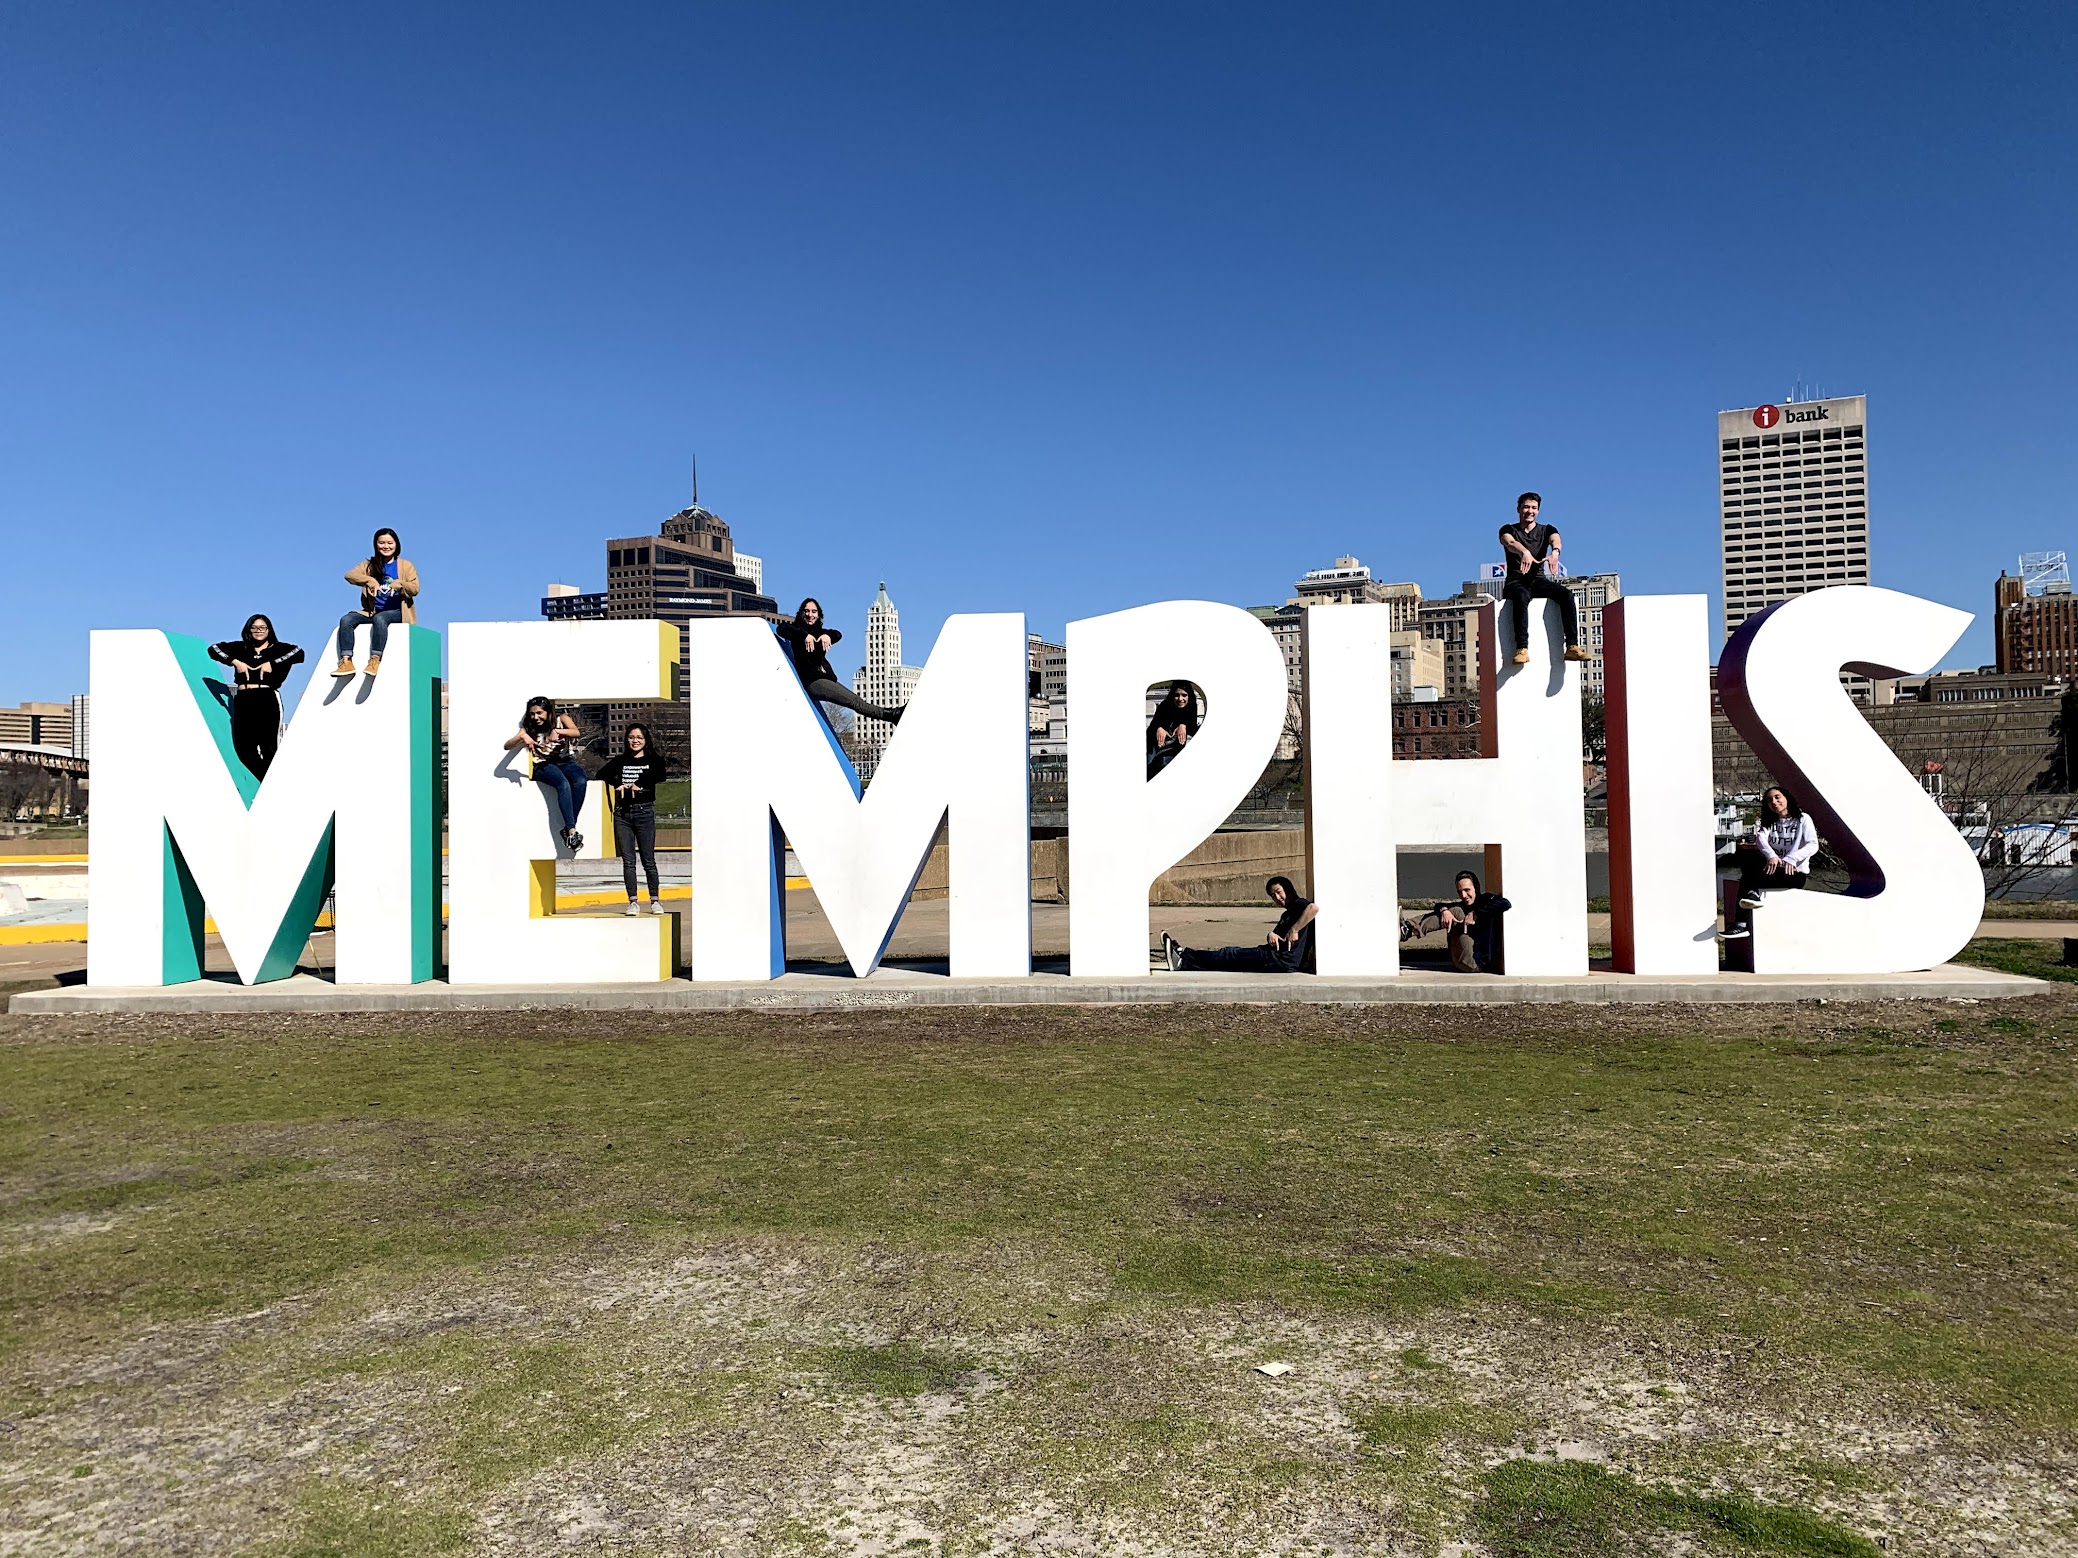 A group of people celebrating their spring break on top of a Memphis sign.